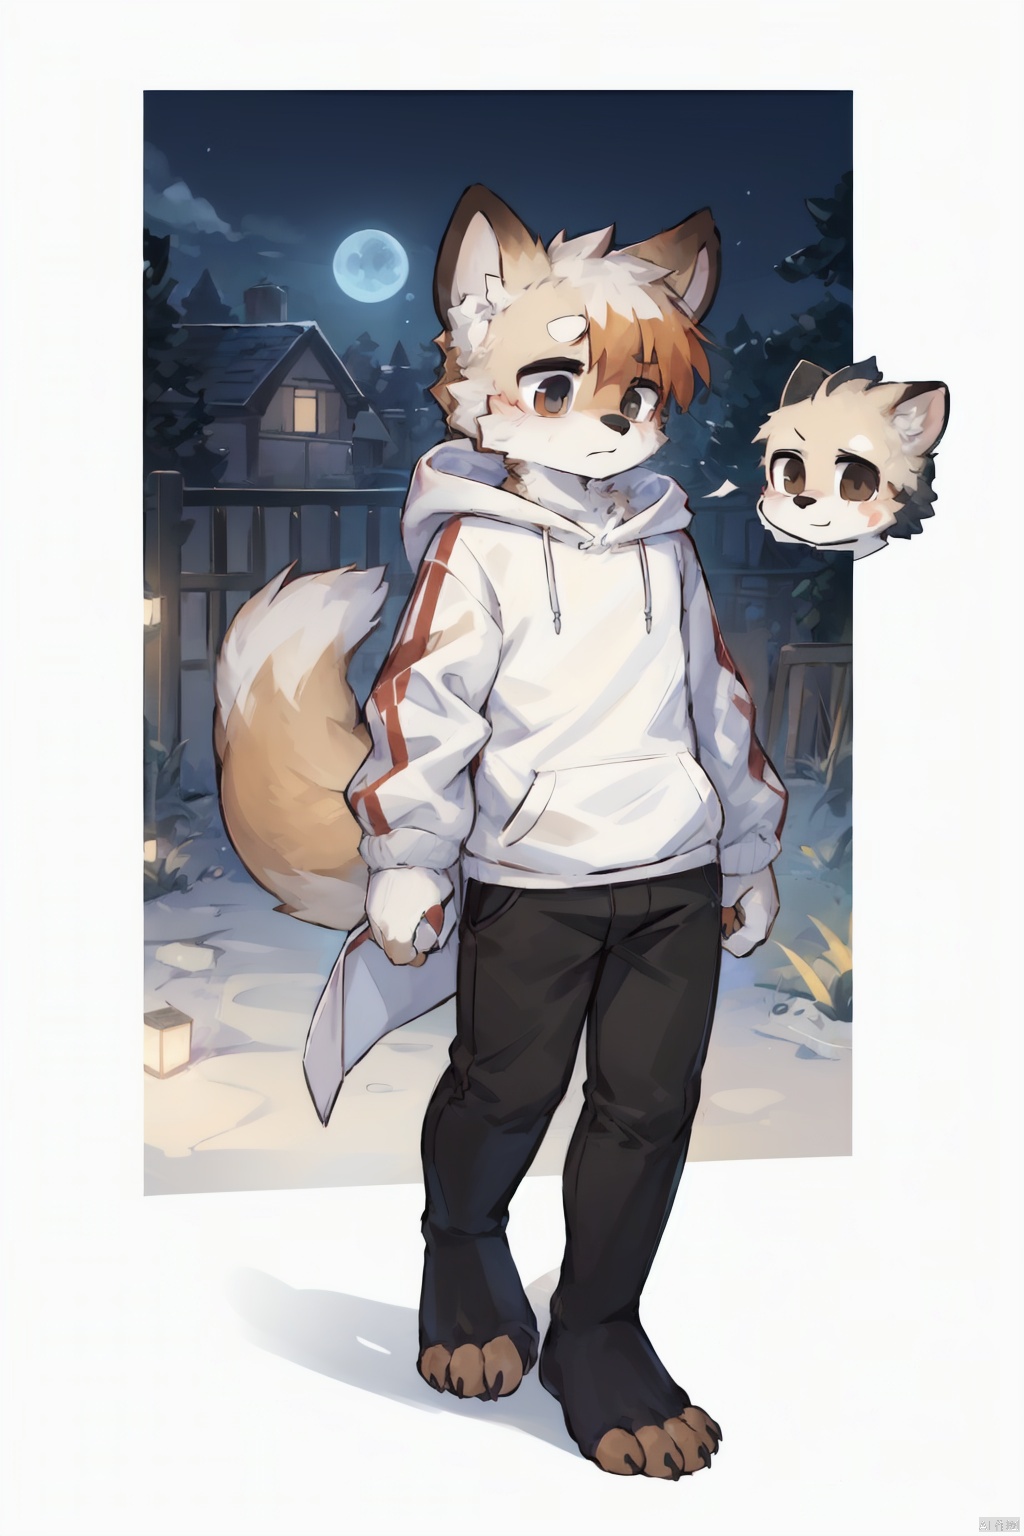  only one boy,from head to foot,orange hair,Long hair and waist length,rein,The lower limbs are lesser panda feet,There is a lesser panda tail behind body,wearing Hoodies,, shota, furry